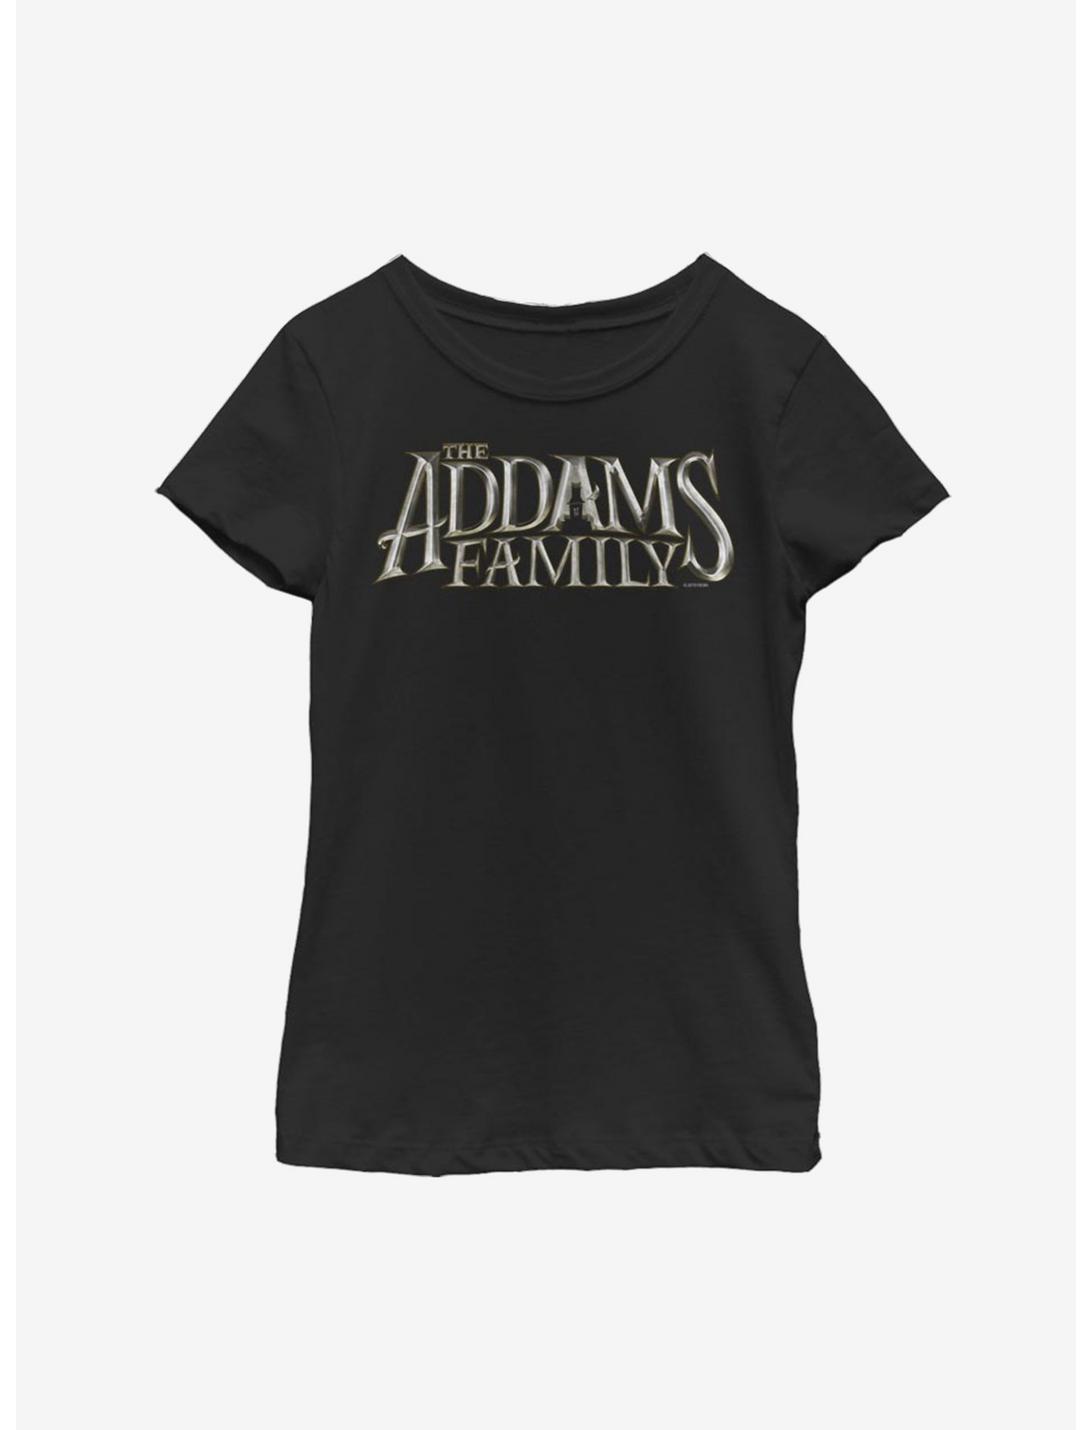 The Addams Family Theatrical Logo Youth Girls T-Shirt, BLACK, hi-res